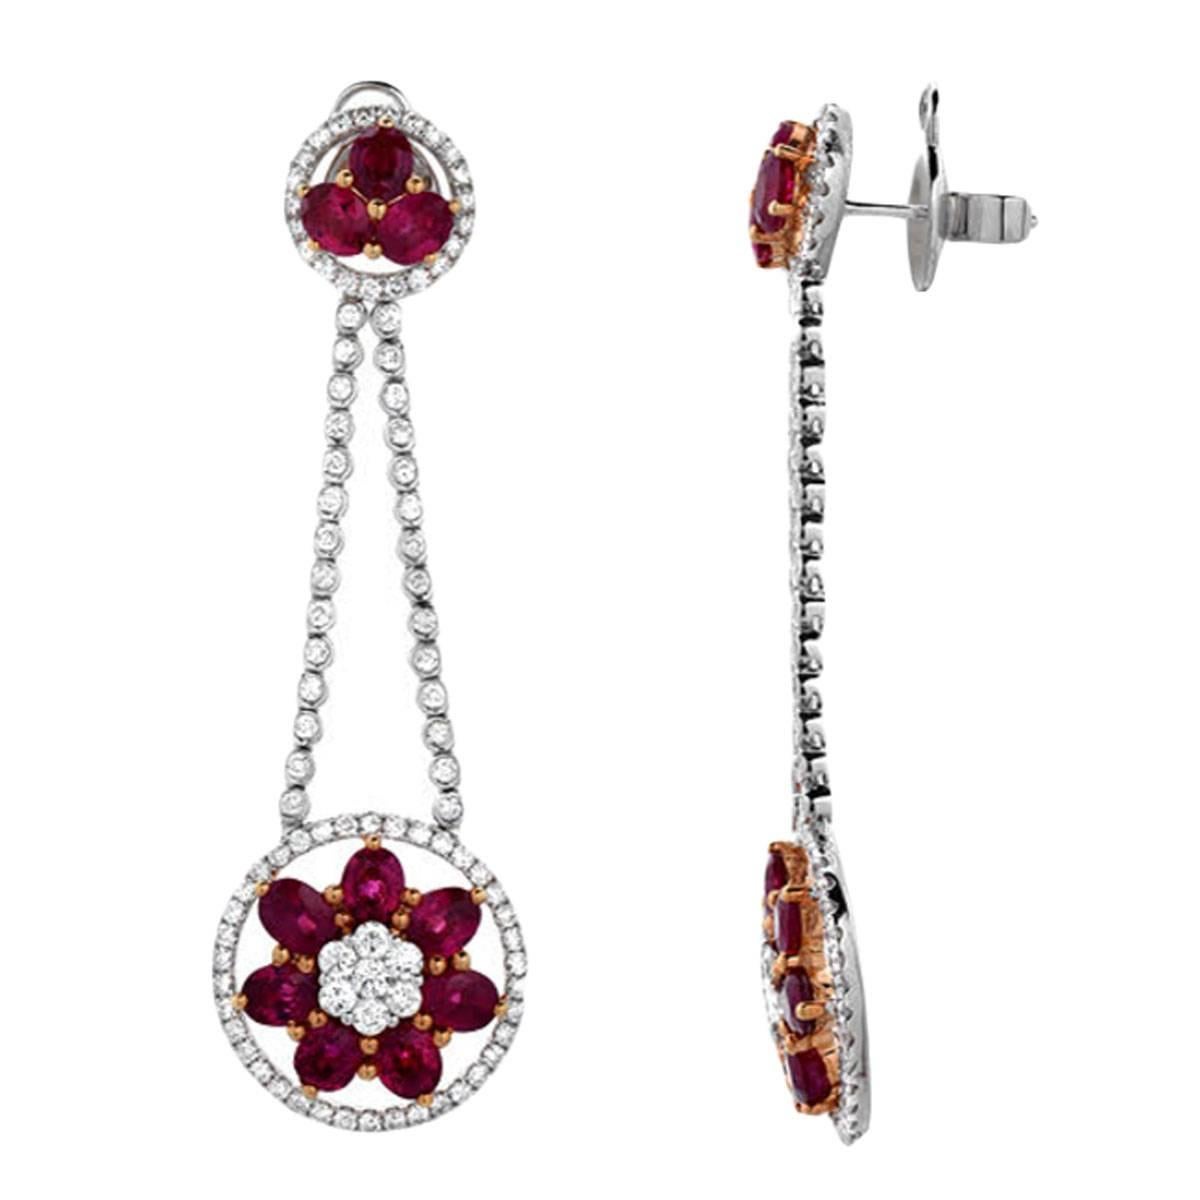 A feminine pair of earrings featuring 8.82 carats of oval shaped vivid red rubies and 2.96 carats of VS quality round cut diamonds. The pendulum style earrings have a soft movement to them, set in 18K gold.

Earring Length: 2.45 inches
Earring